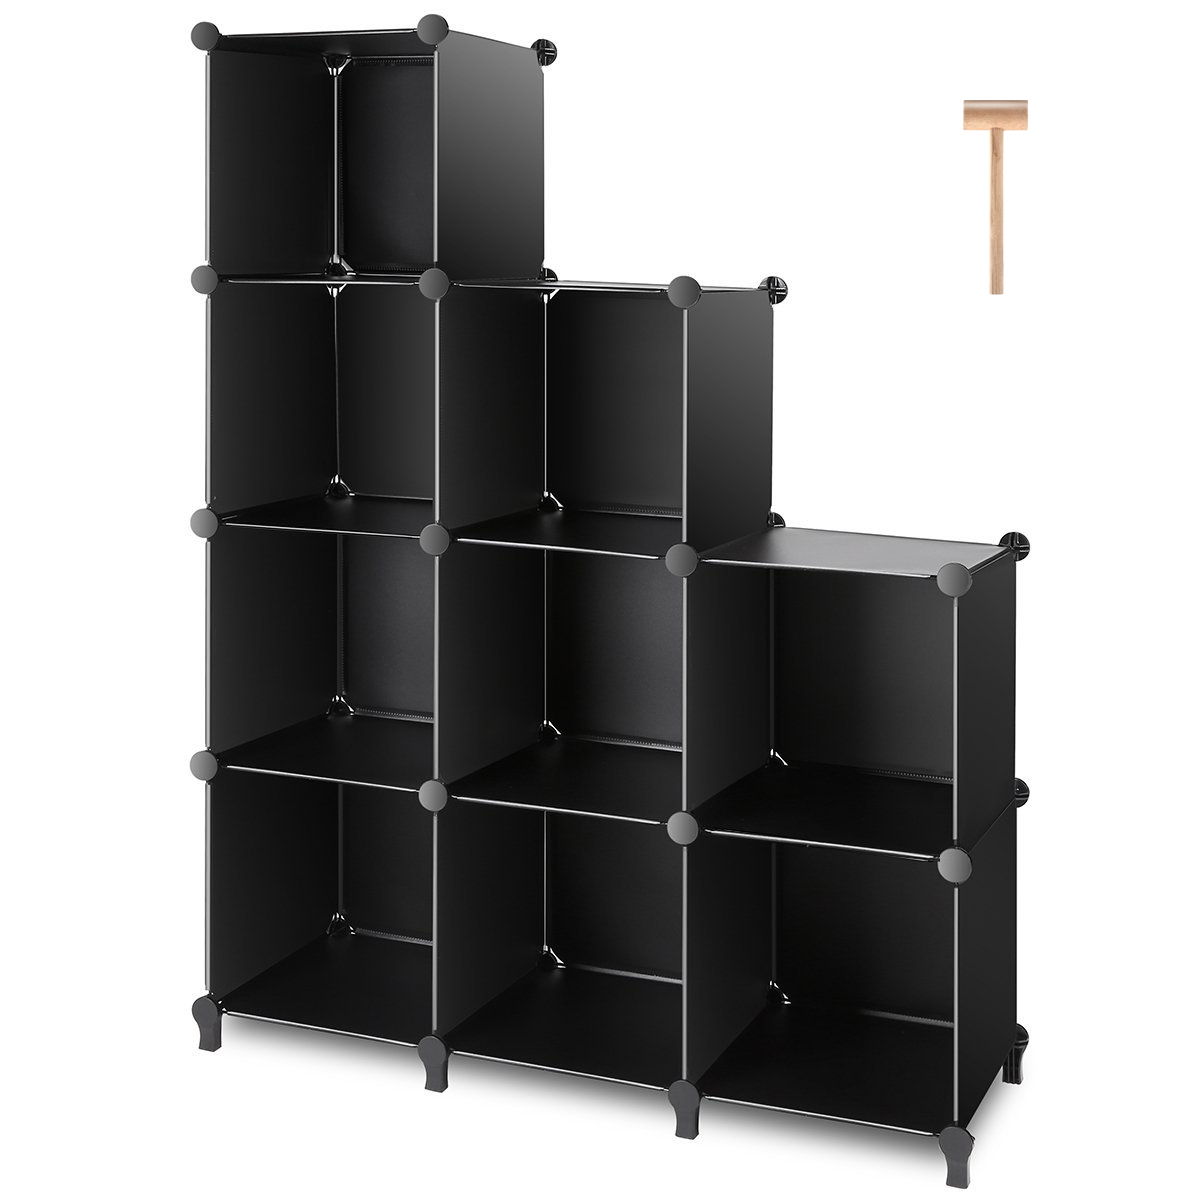 TomCare Cube Storage 9-Cube Closet Organizer Shelves Plastic Storage Cube Organizer DIY Closet Organizer Storage Cabinet Modular Book Shelf Shelving for Bedroom Living Room Office, Black